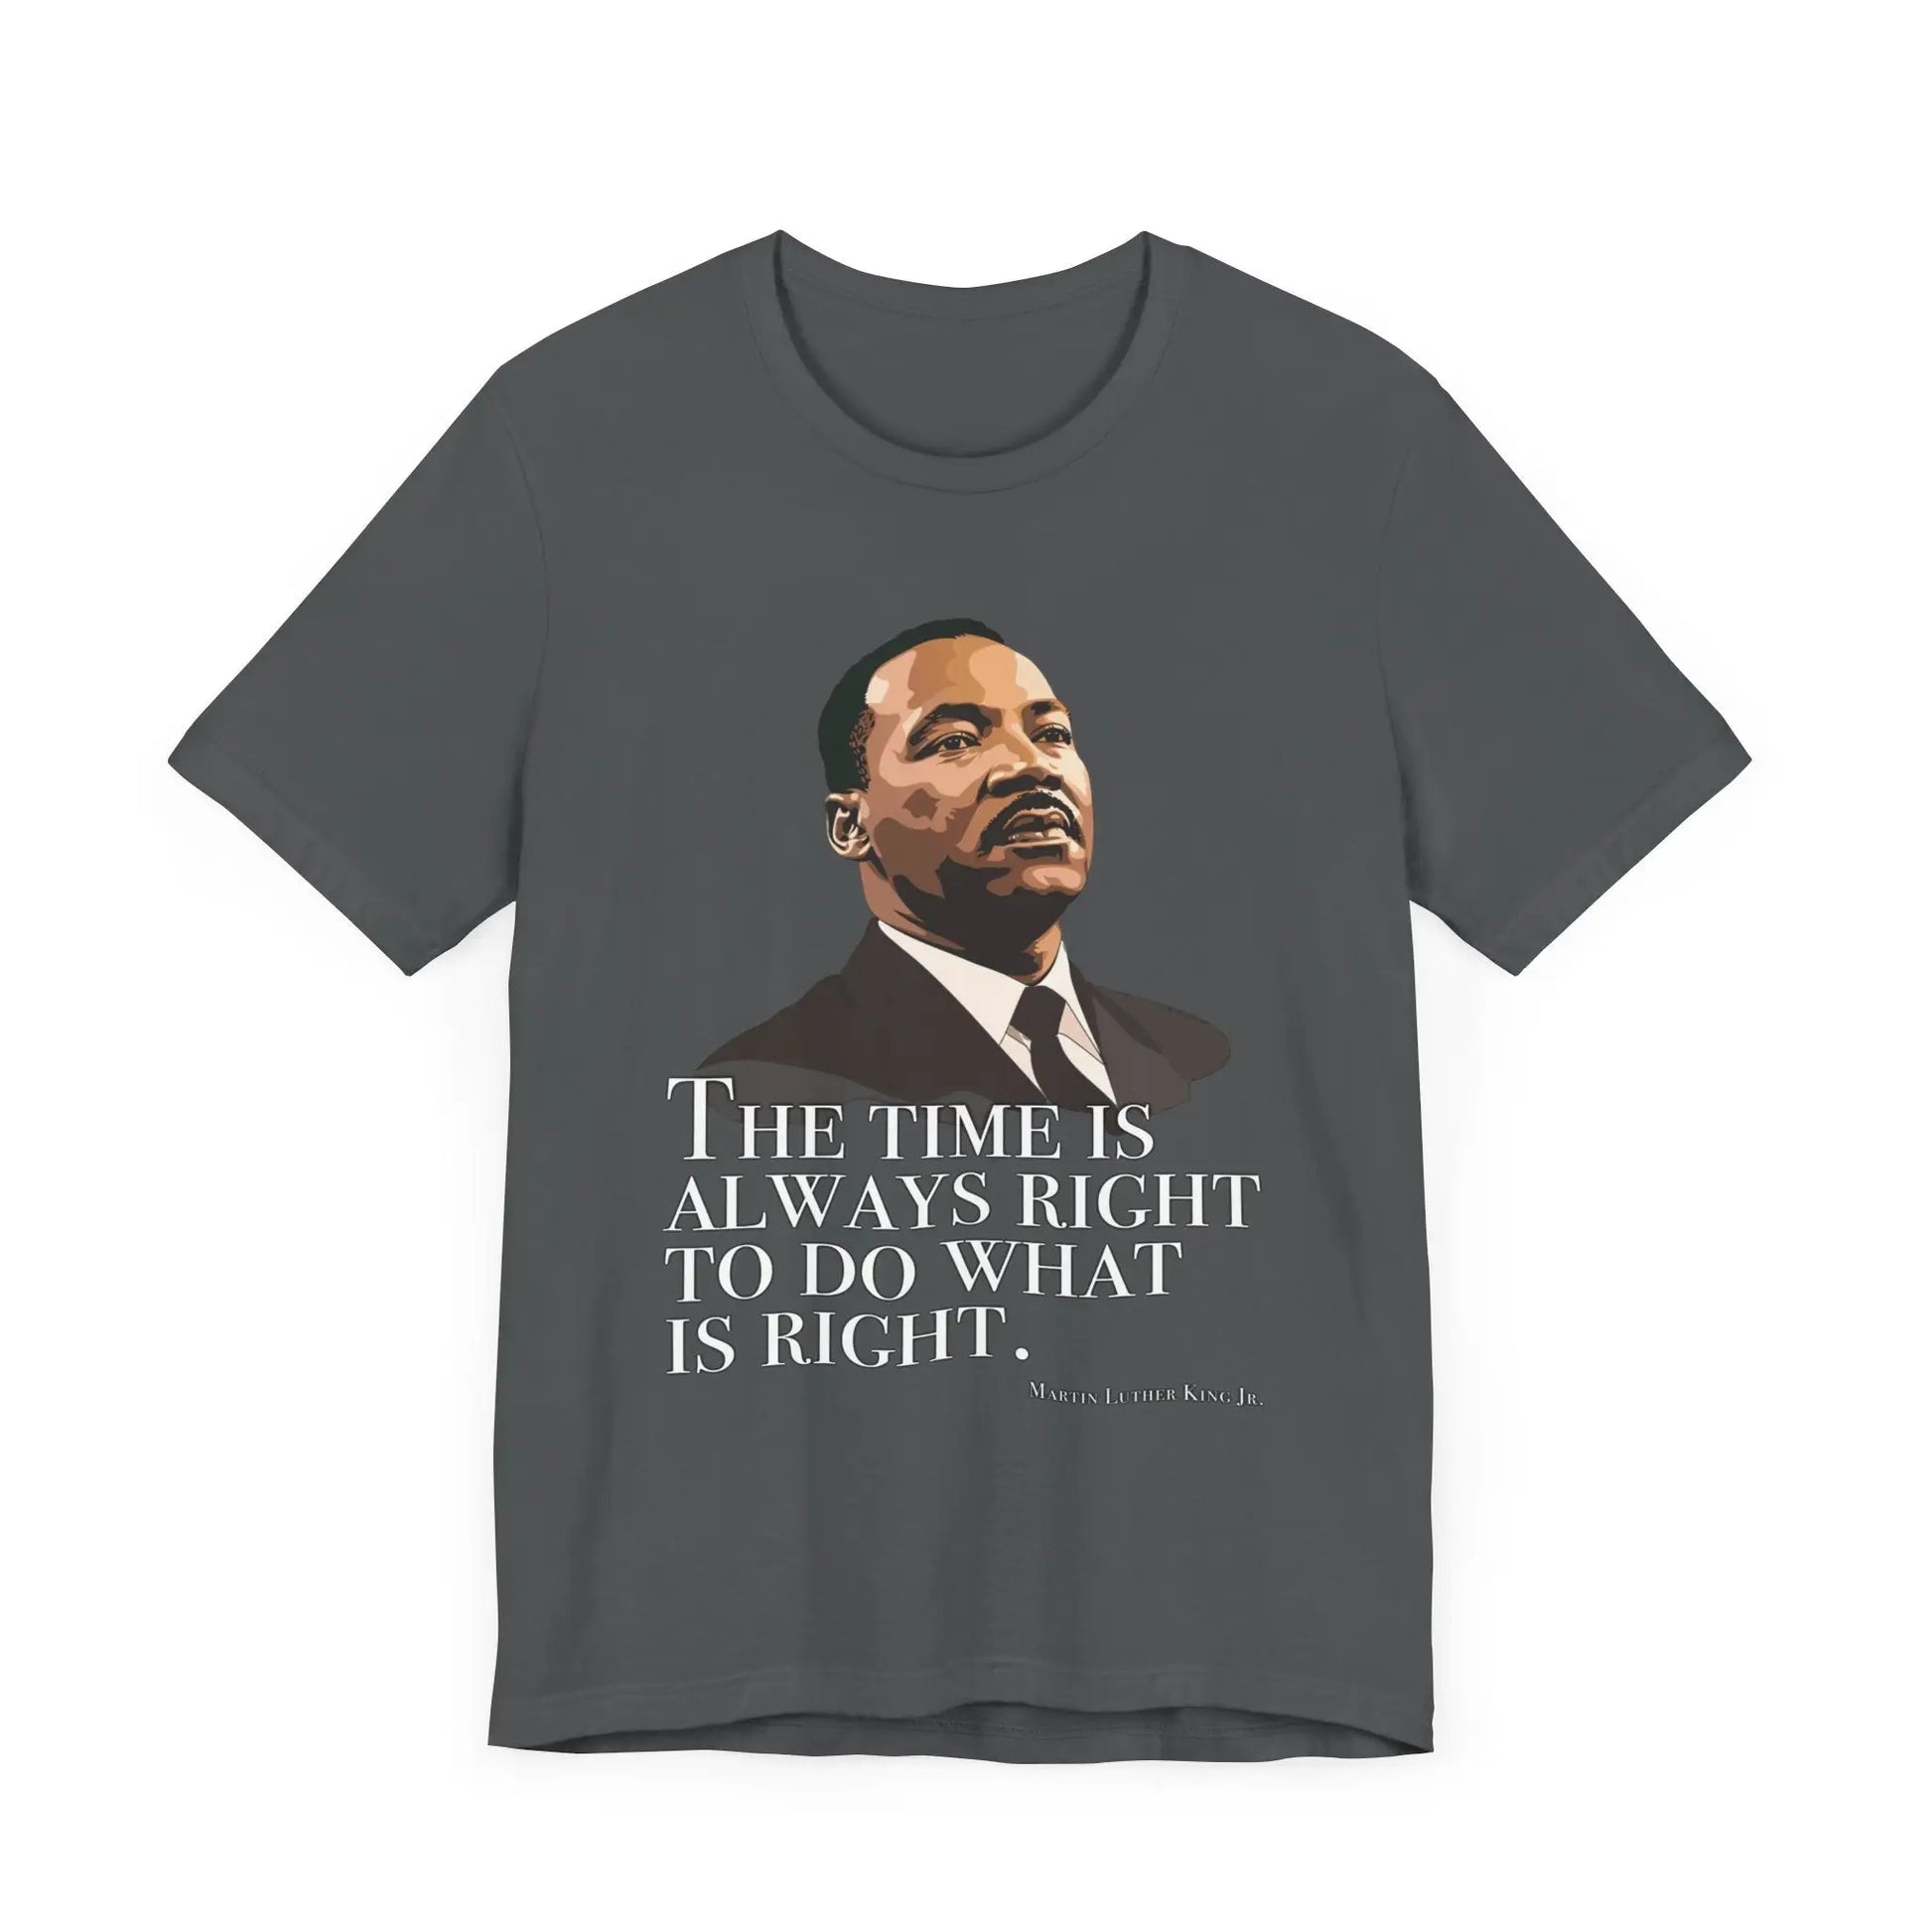 The Time Is Always Right Men's Tee - Wicked Tees